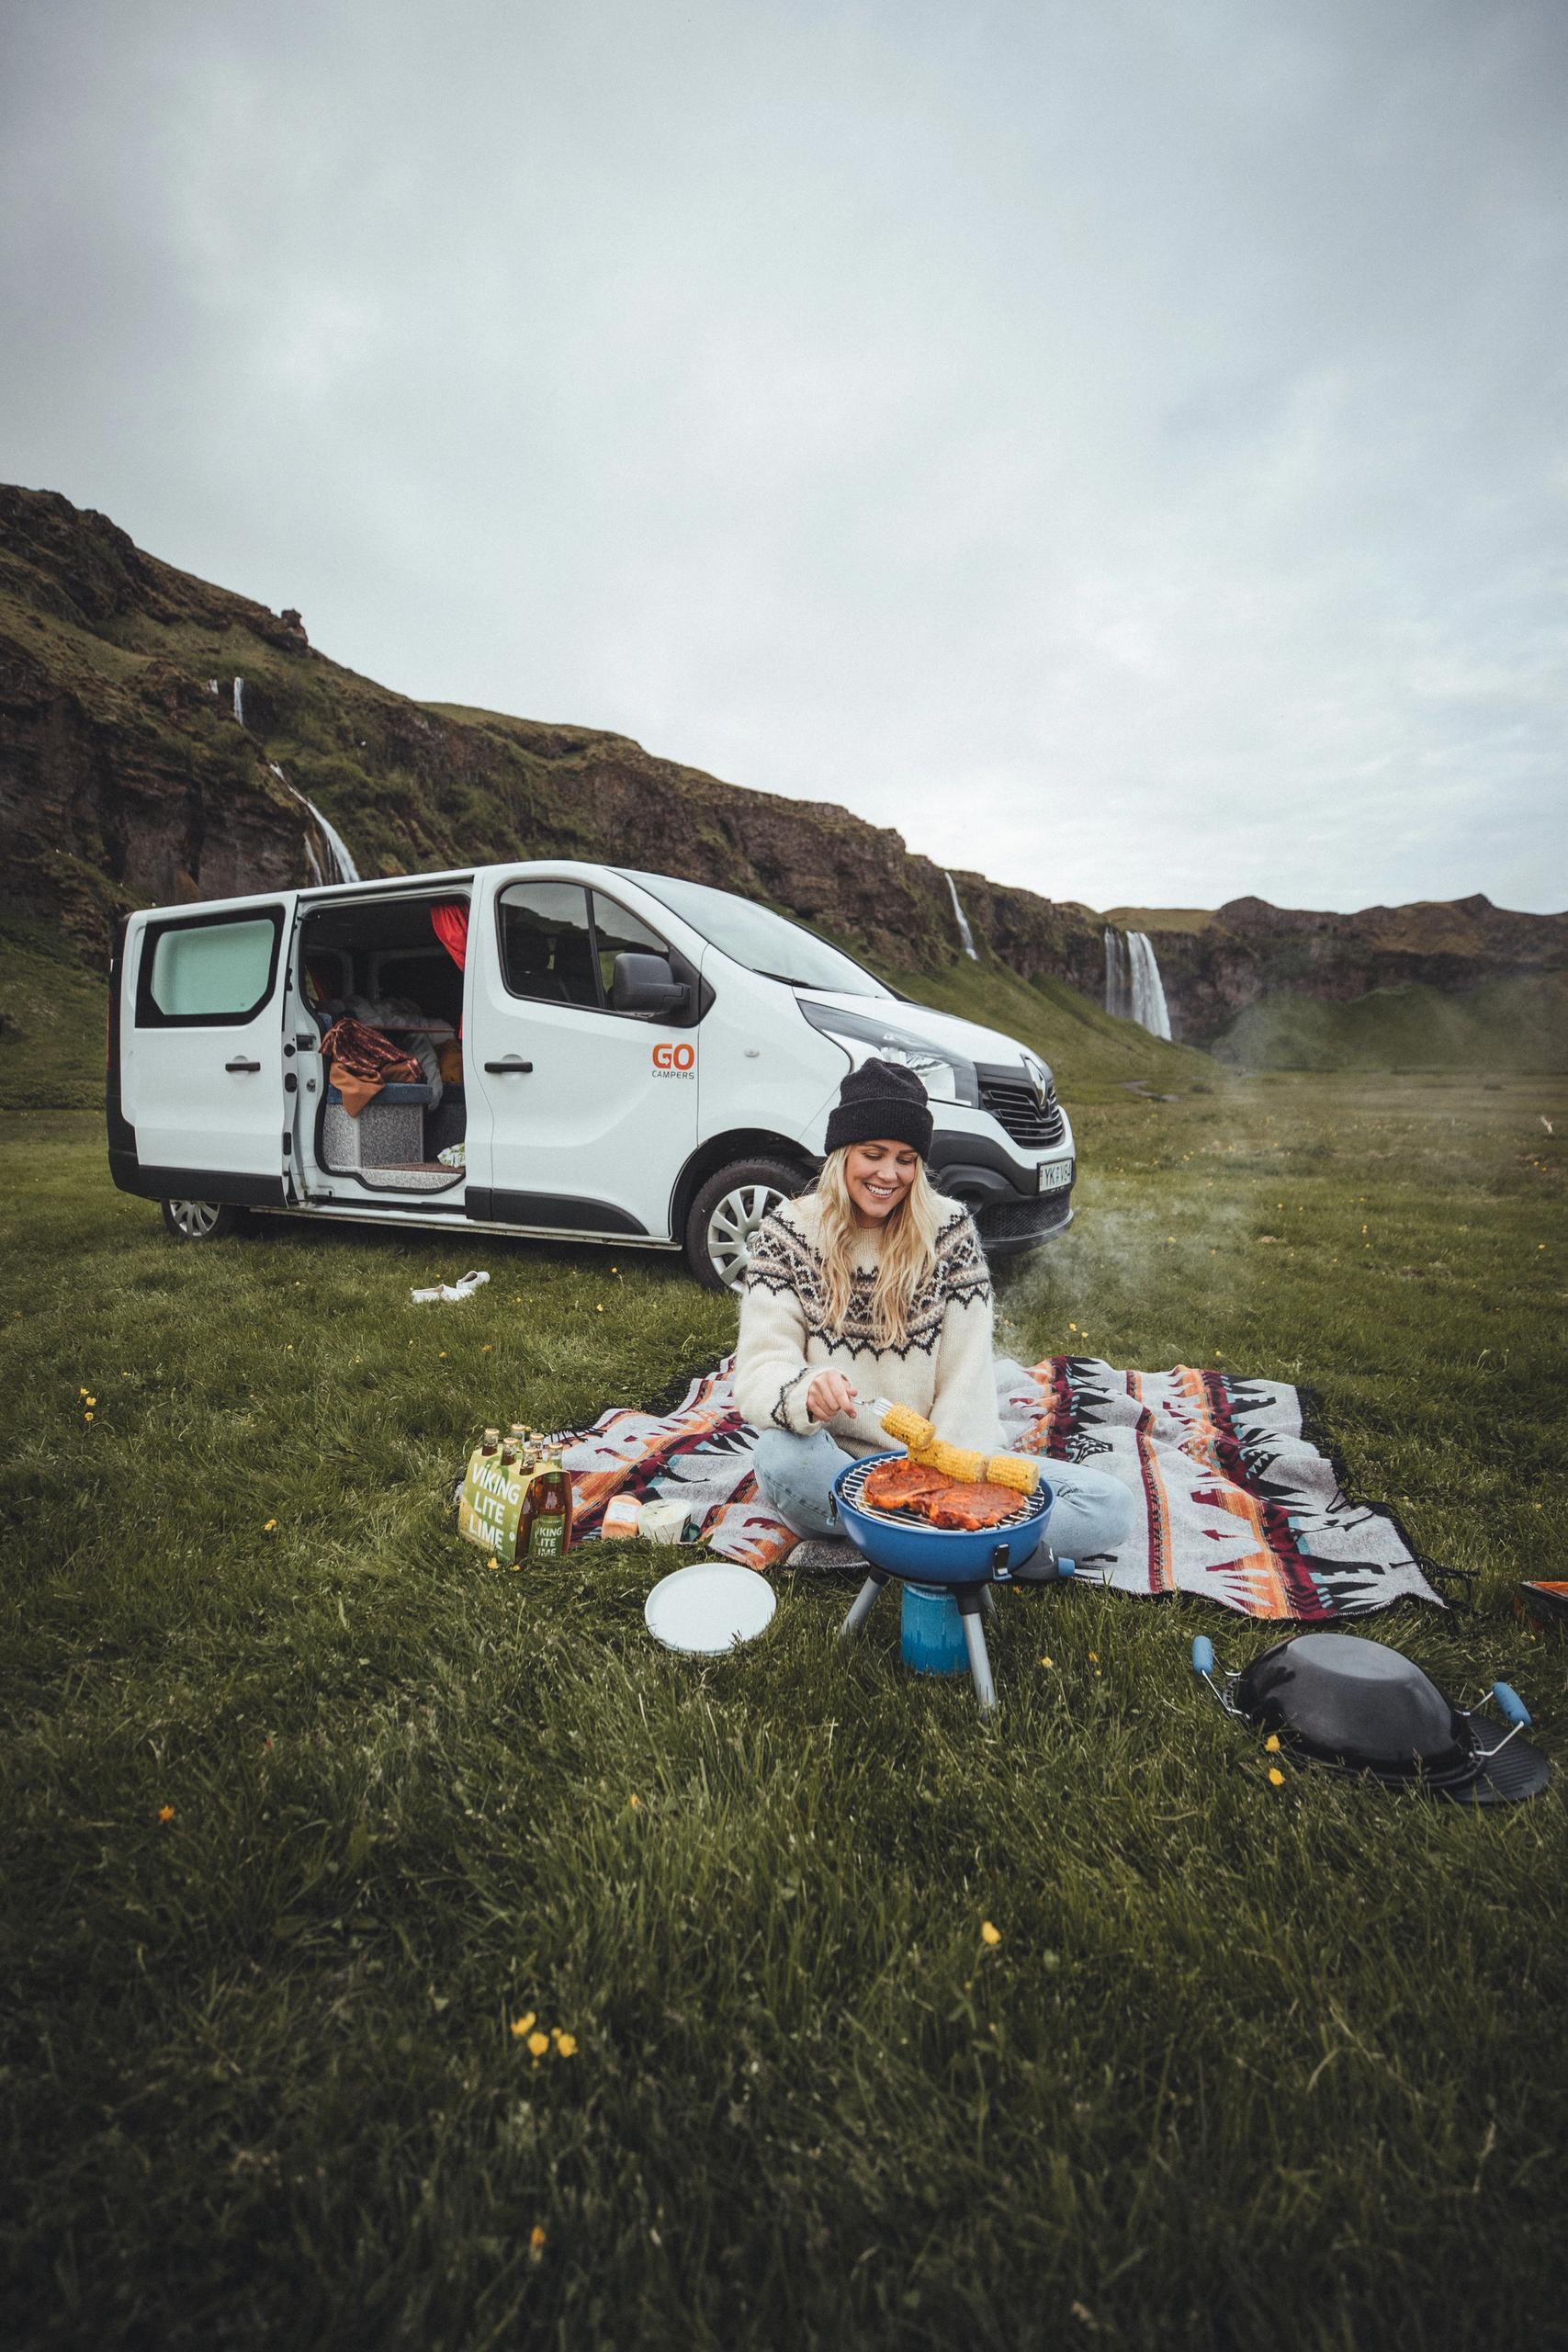 A woman Camping the last weekend in iceland in july, brining with her a sleep mask